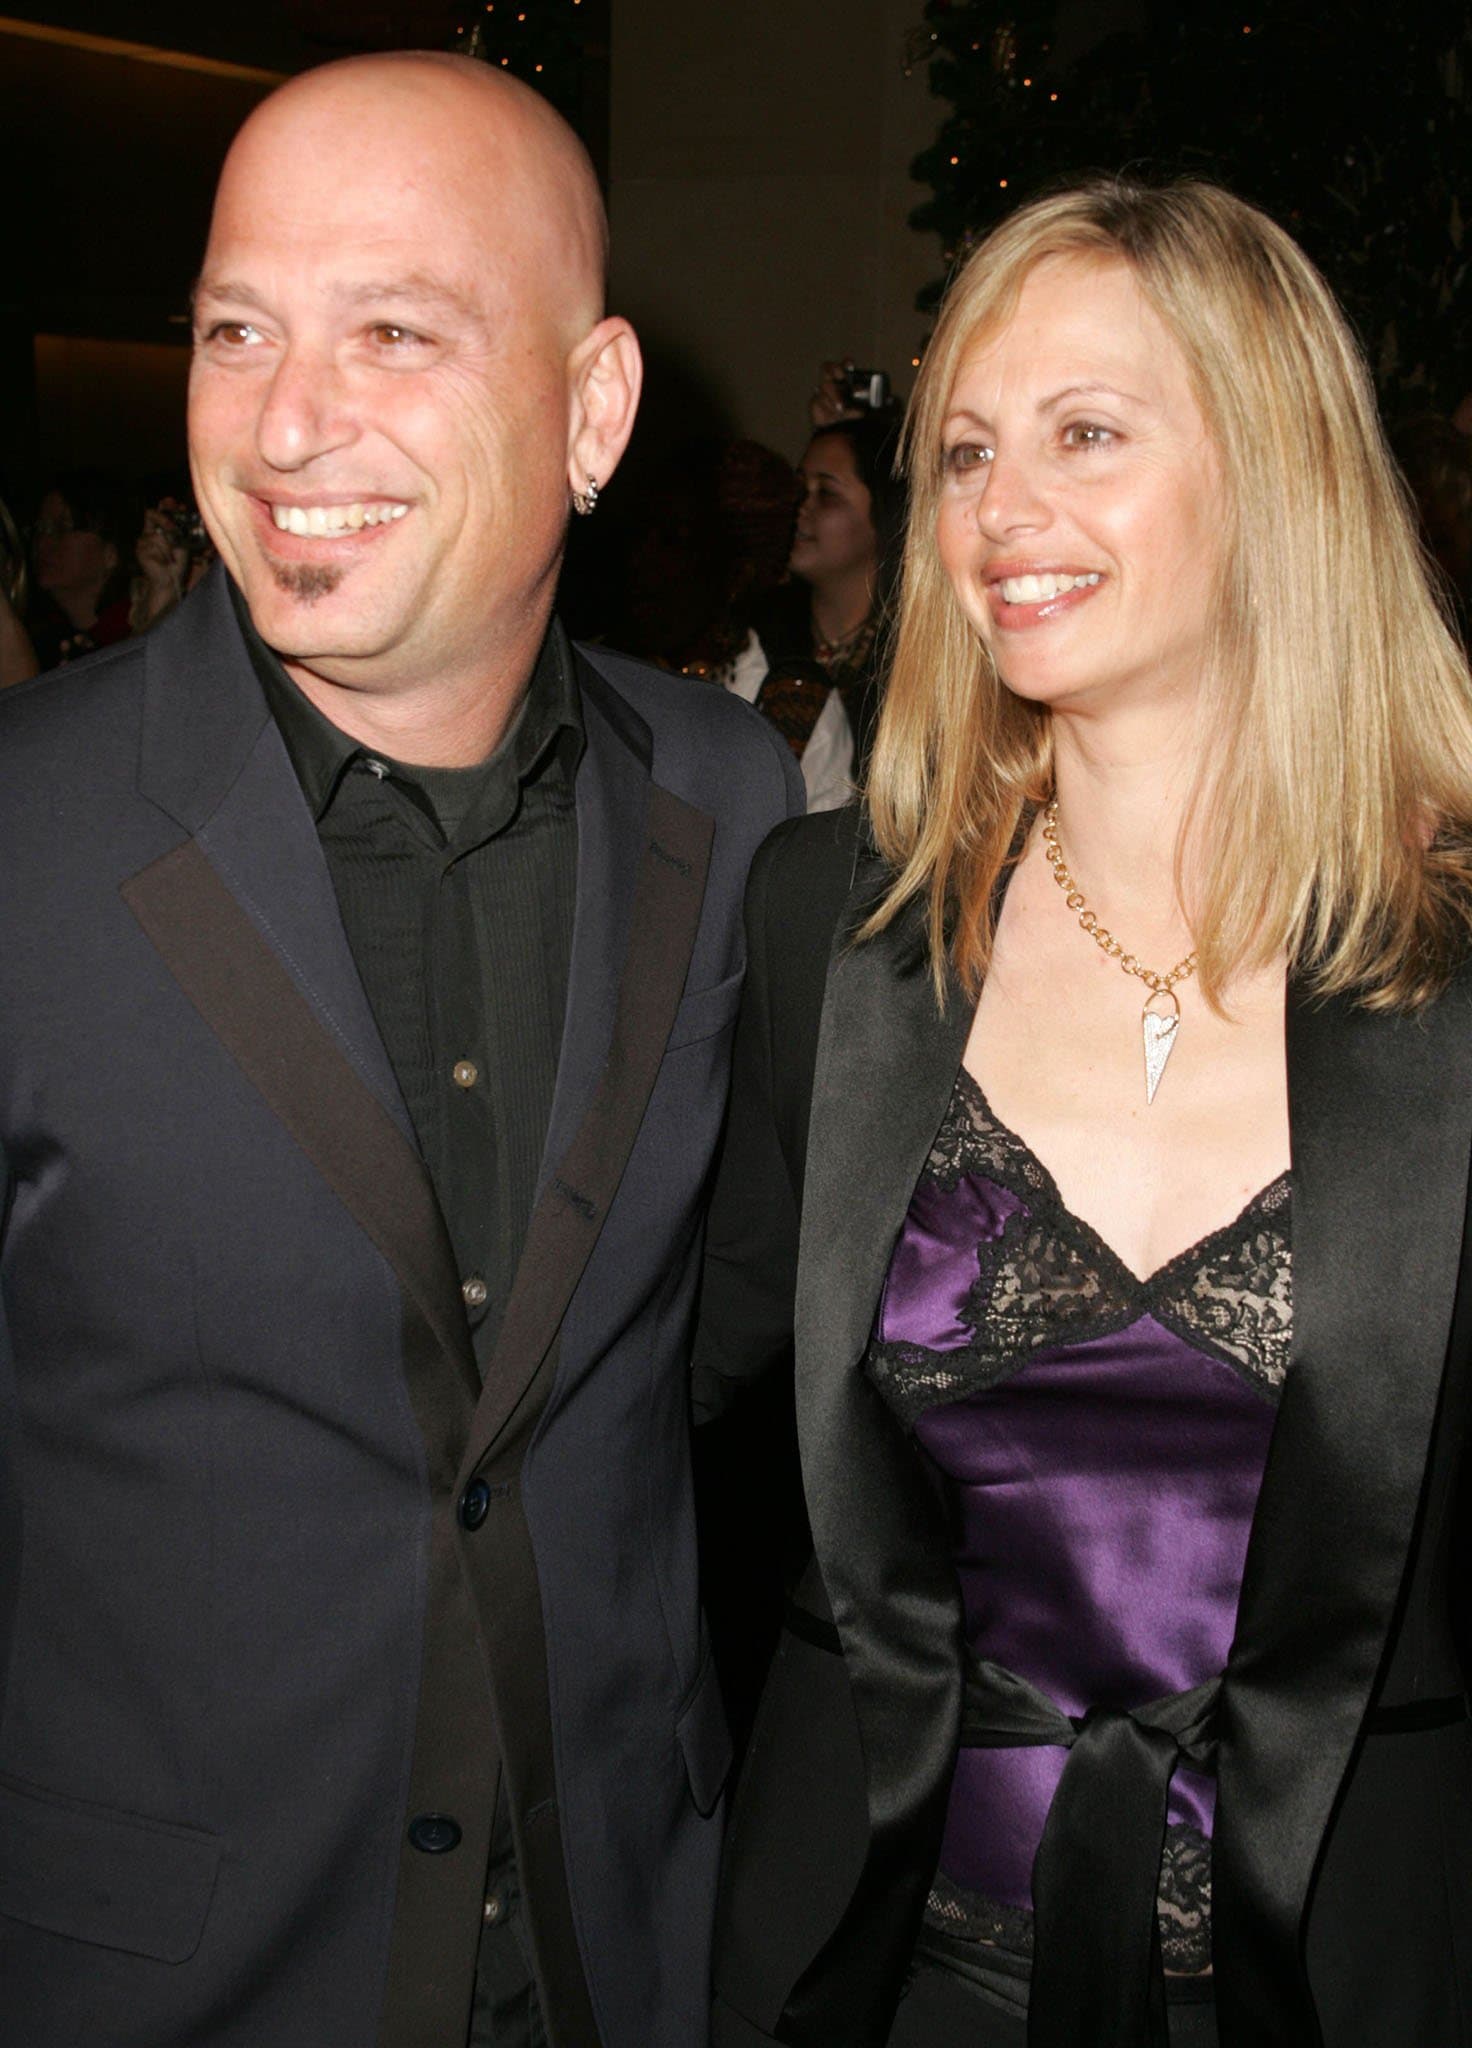 Howie Mandel and his wife Terry began dating in high school and tied the knot in 1980